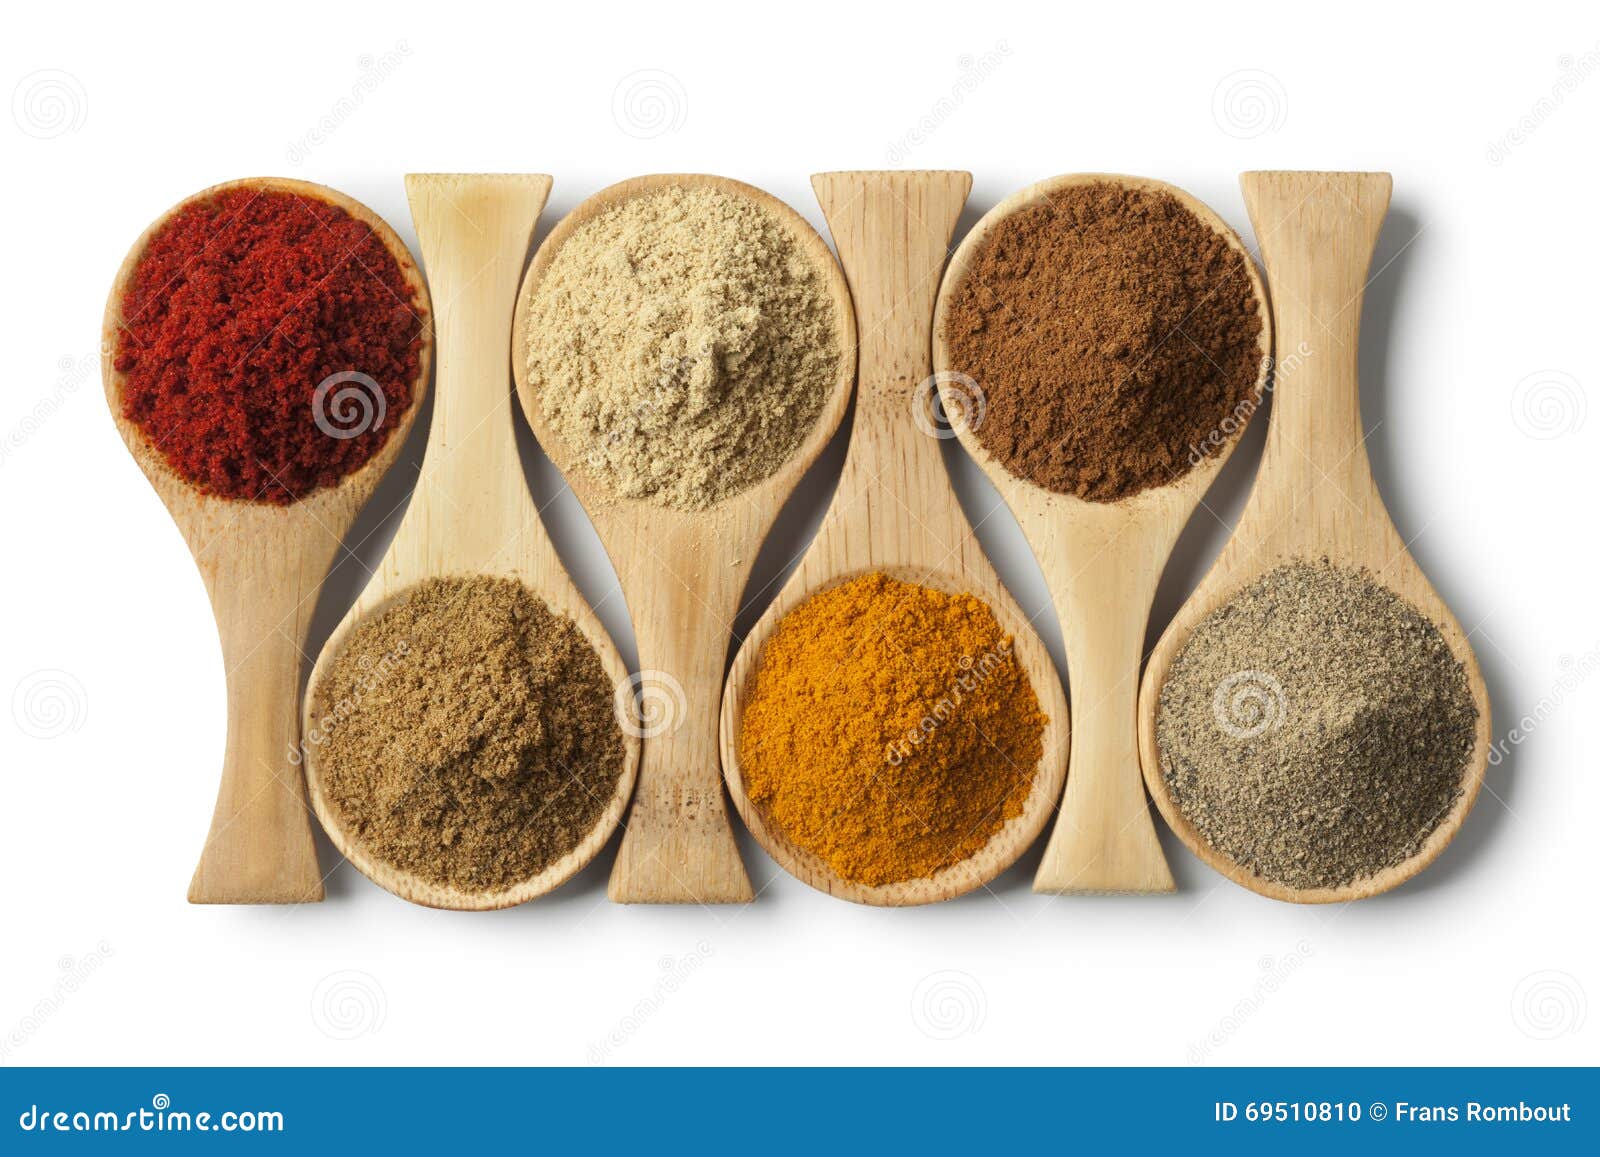 variety of dried herbs and spices